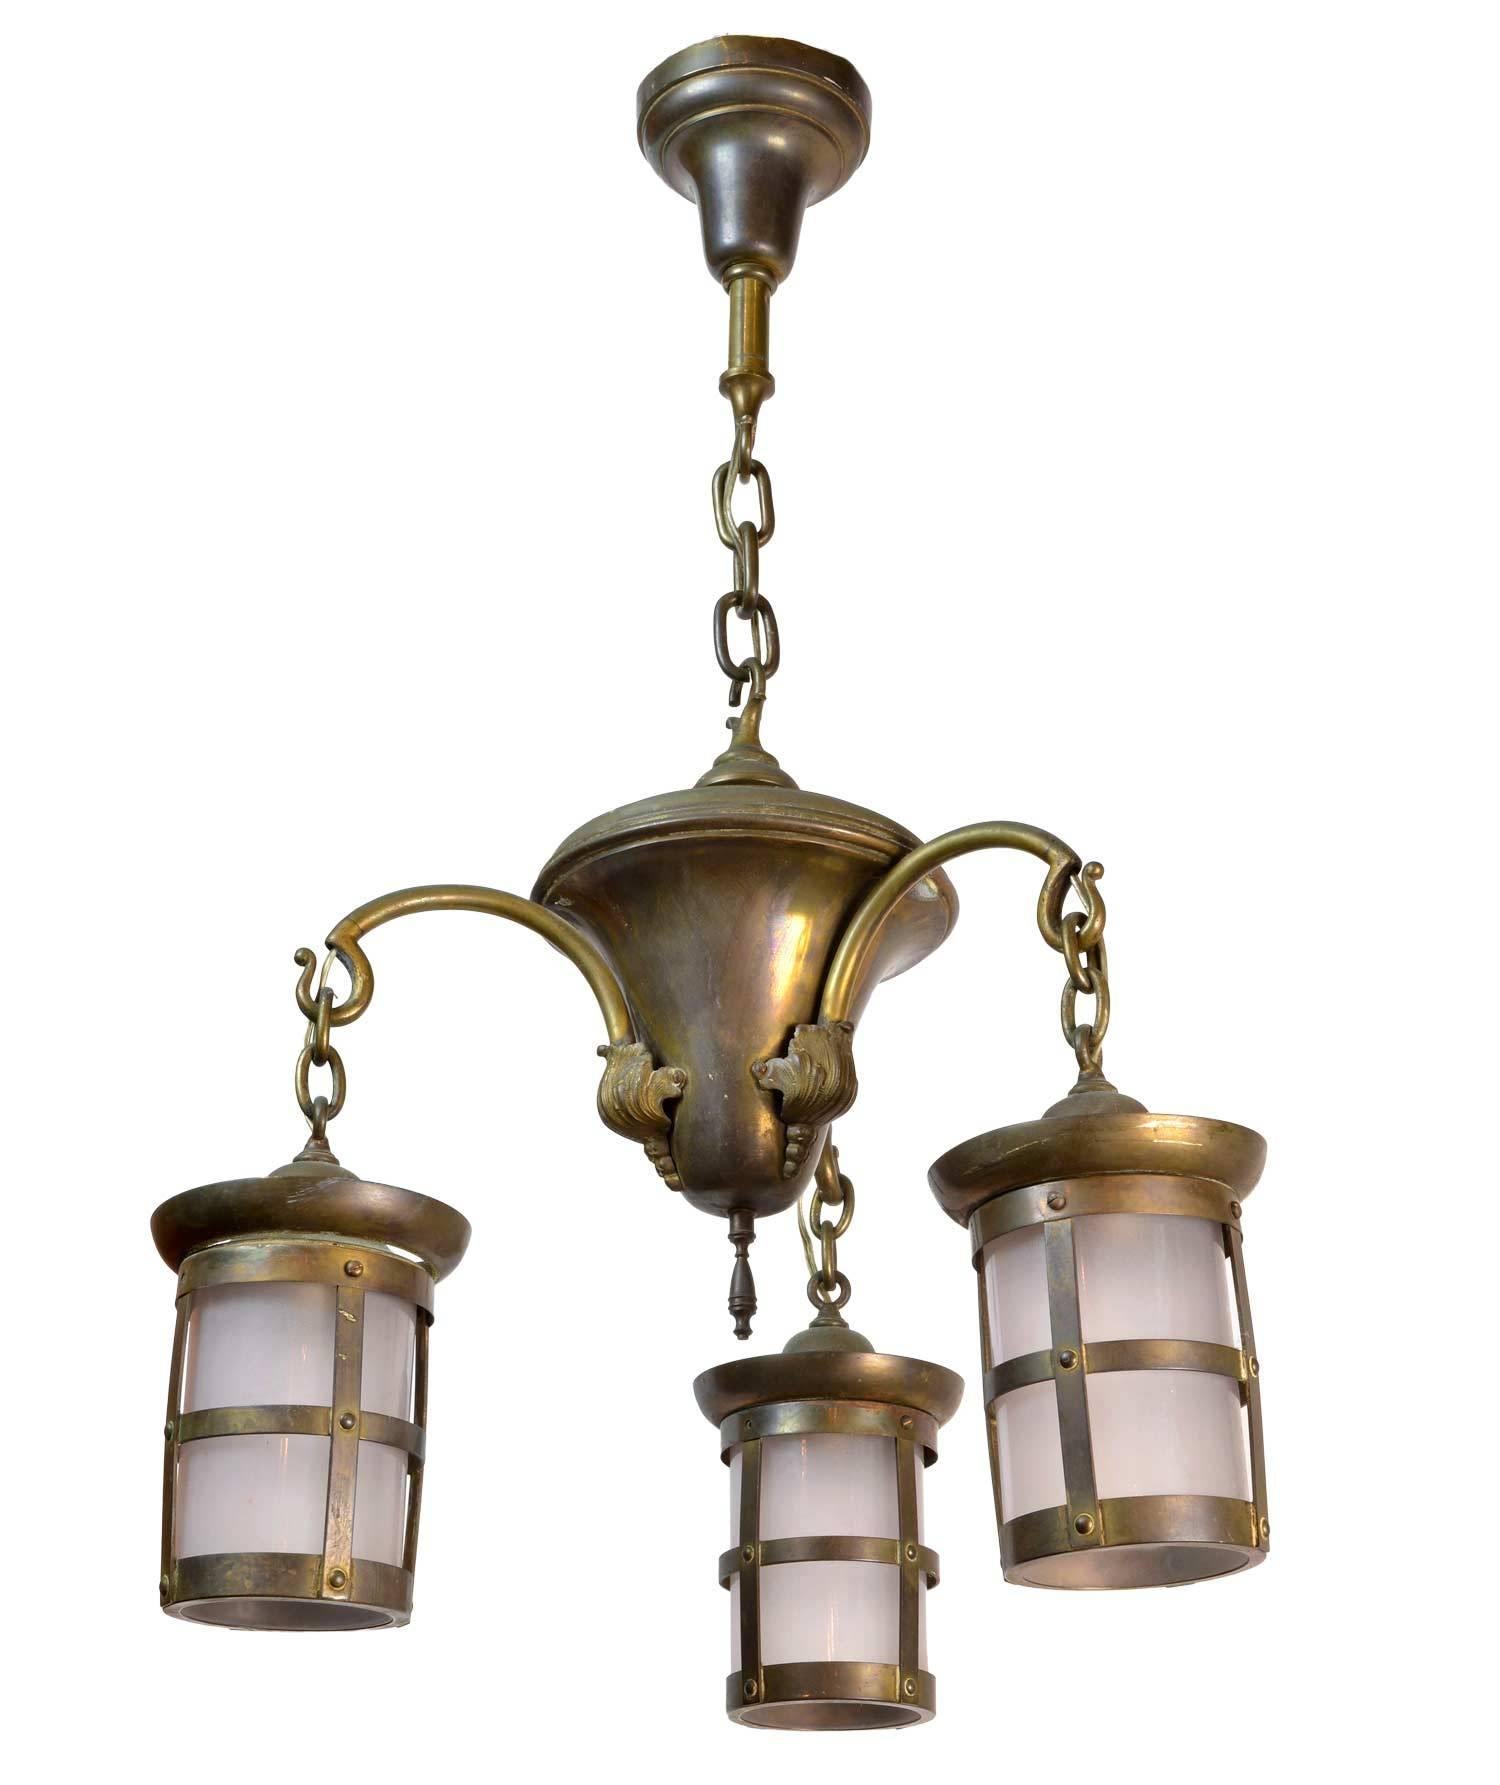 This chandelier is a unique example of craftsman lighting. Elegant curved arms hold three lantern style shades with original etched glass and a perfect brass patina.

We find that early antique lighting was designed as objects of art and we treat